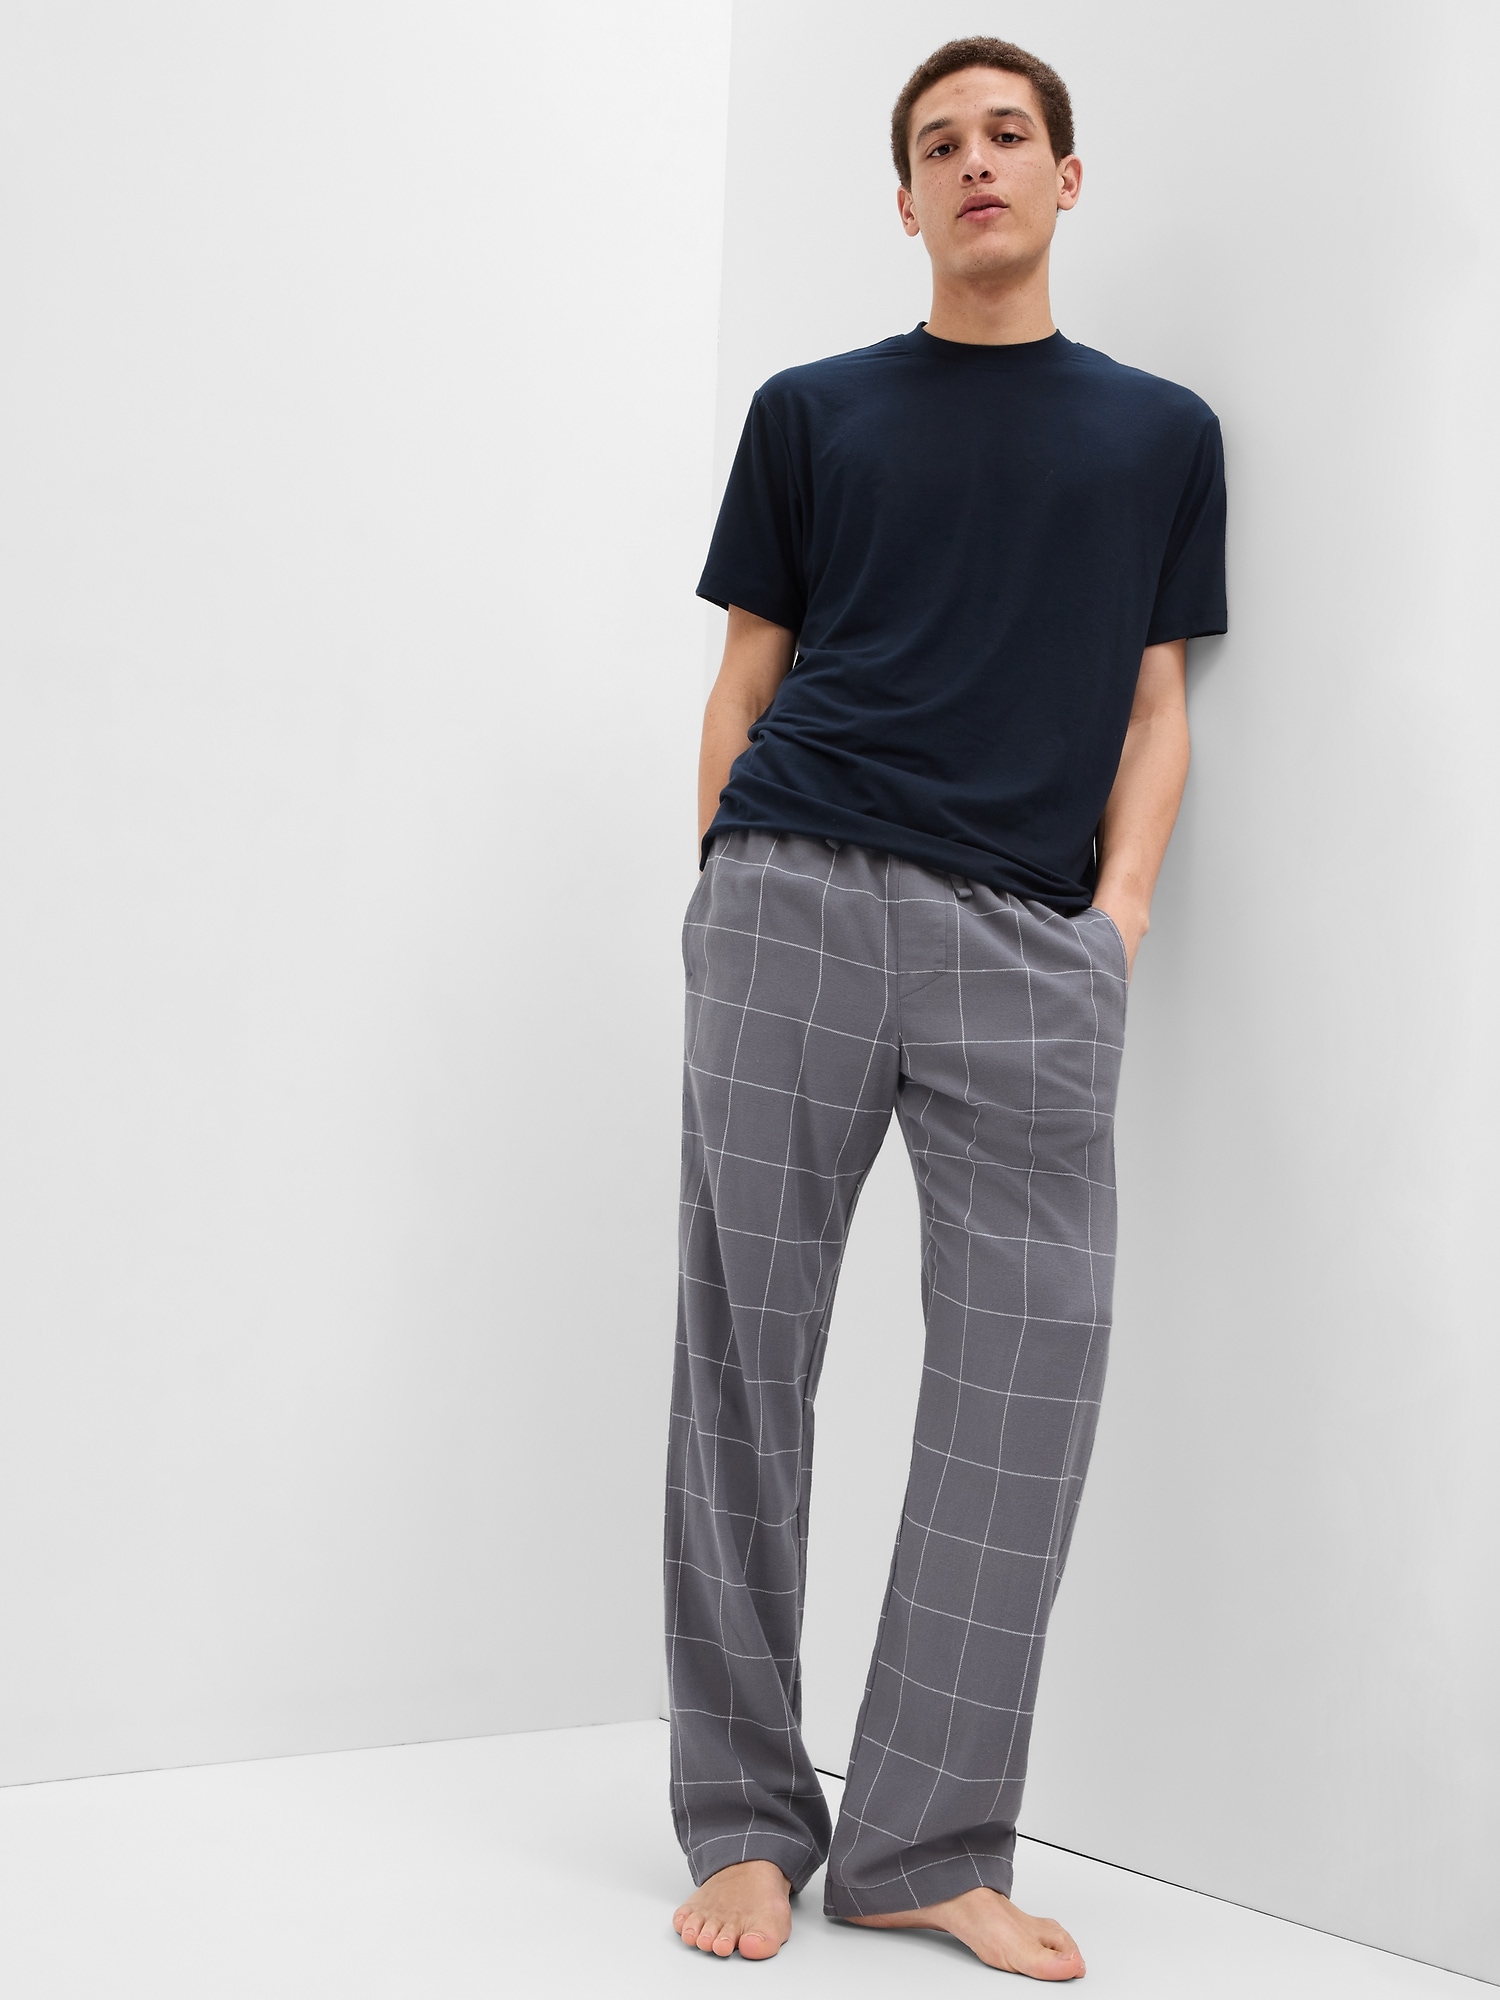 Relaxed Plaid Flannel PJ Pants